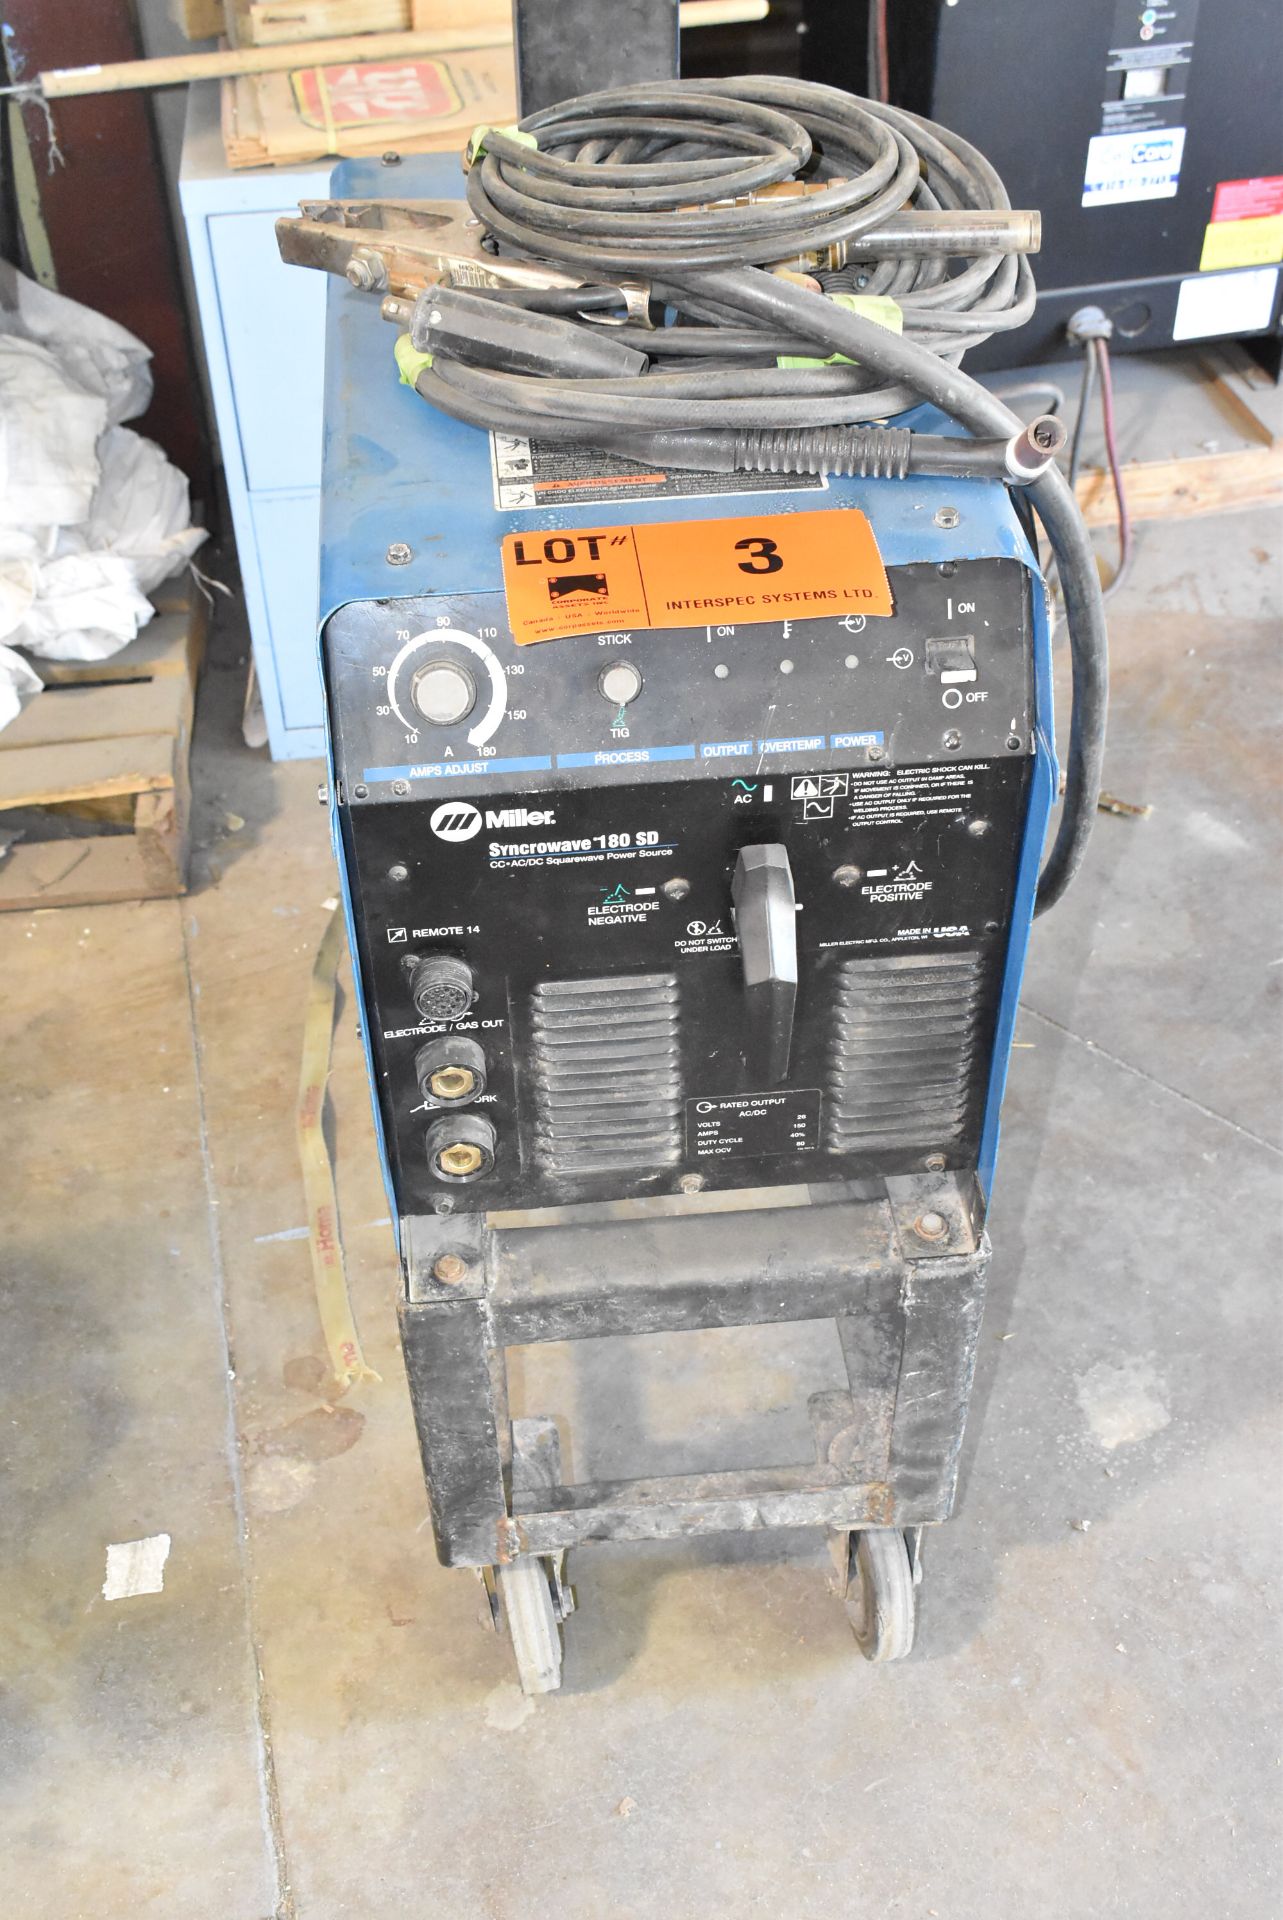 MILLER SYNCROWAVE180 DS TIG WELDER WITH CABLES AND GUN, S/N LA197136 [RIGGING FOR FOR LOT #3 - $25 - Image 2 of 5